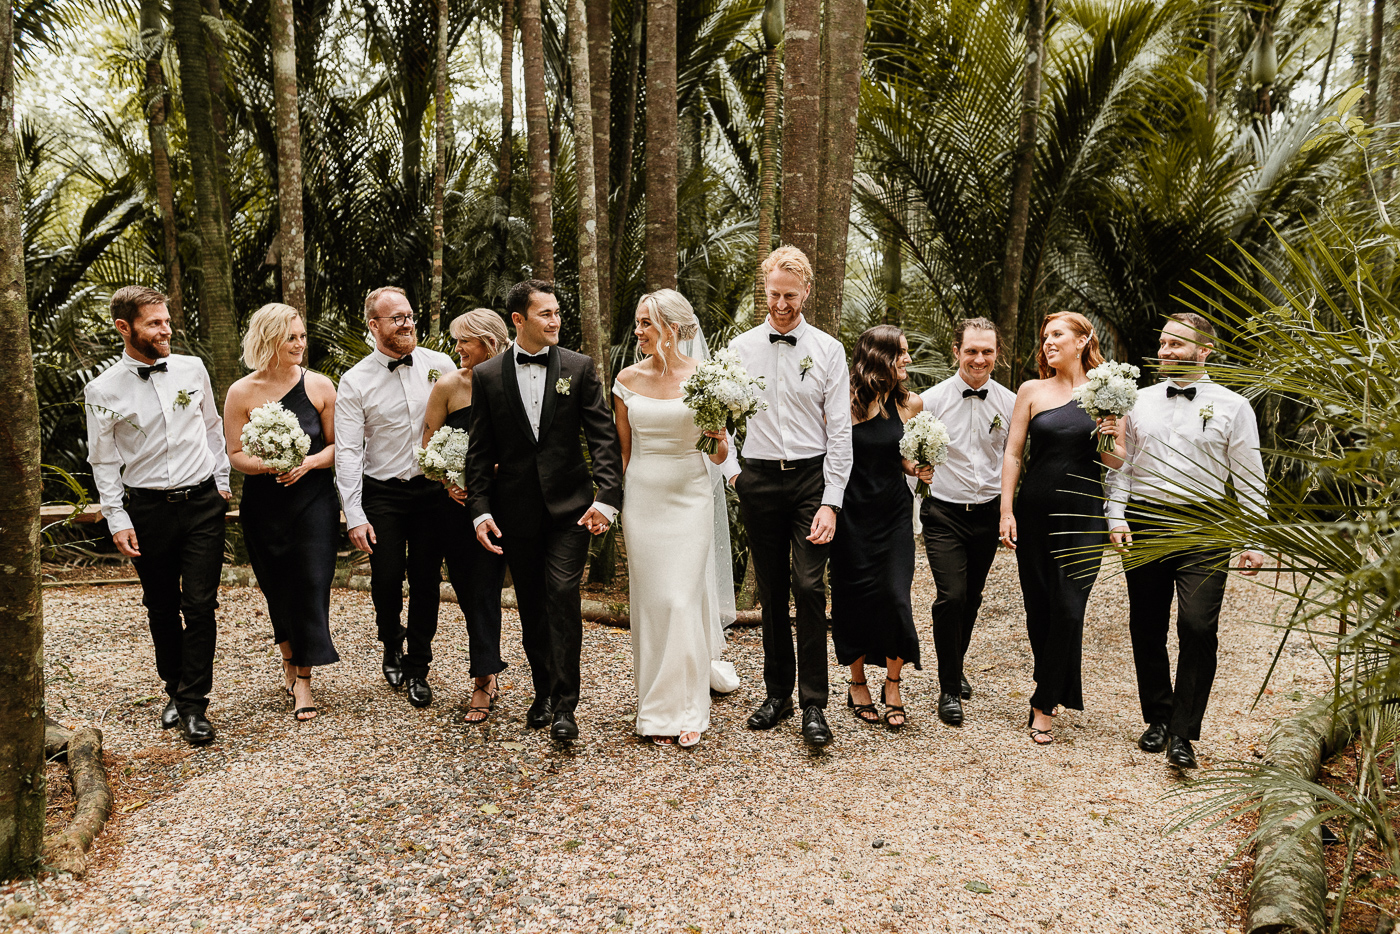 Bridal party photos in the forest at Bridgewater Country Estate